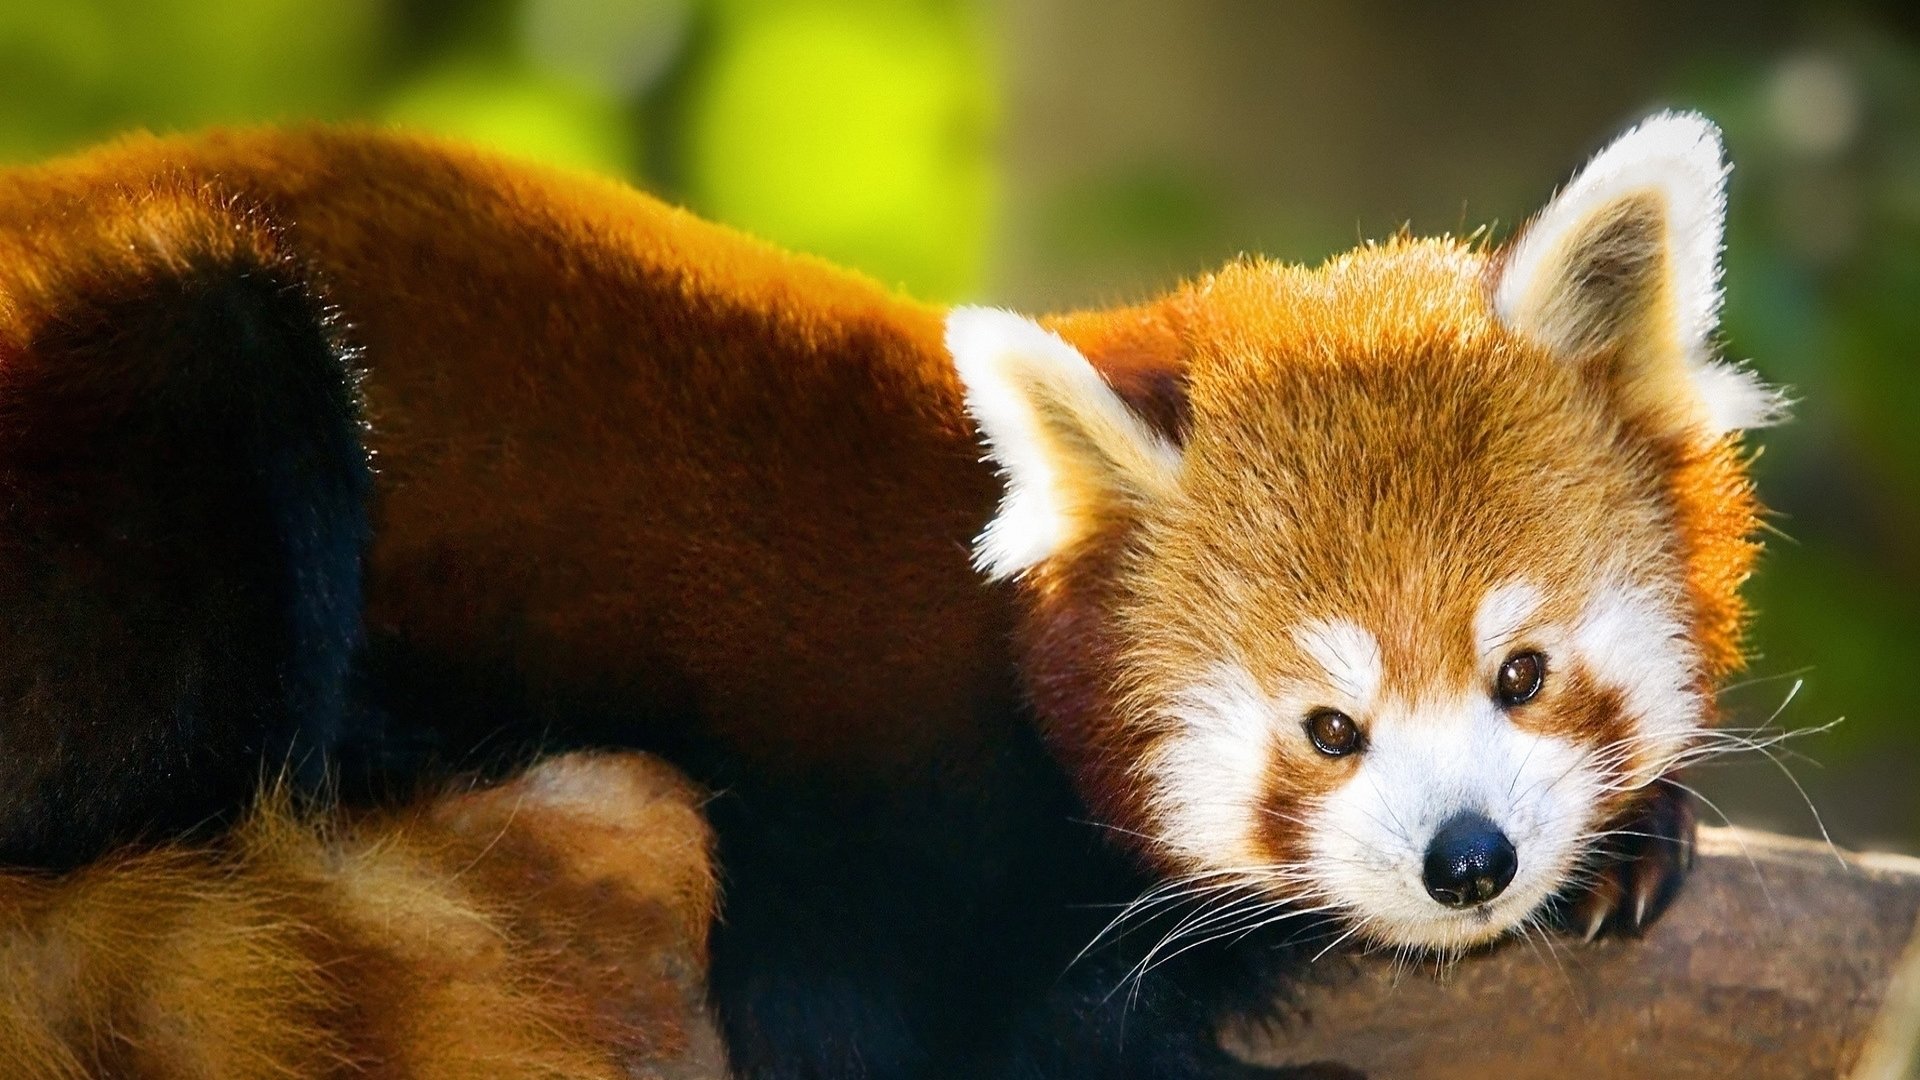 Best Red Panda wallpaper ID:64125 for High Resolution full hd 1920x1080 computer